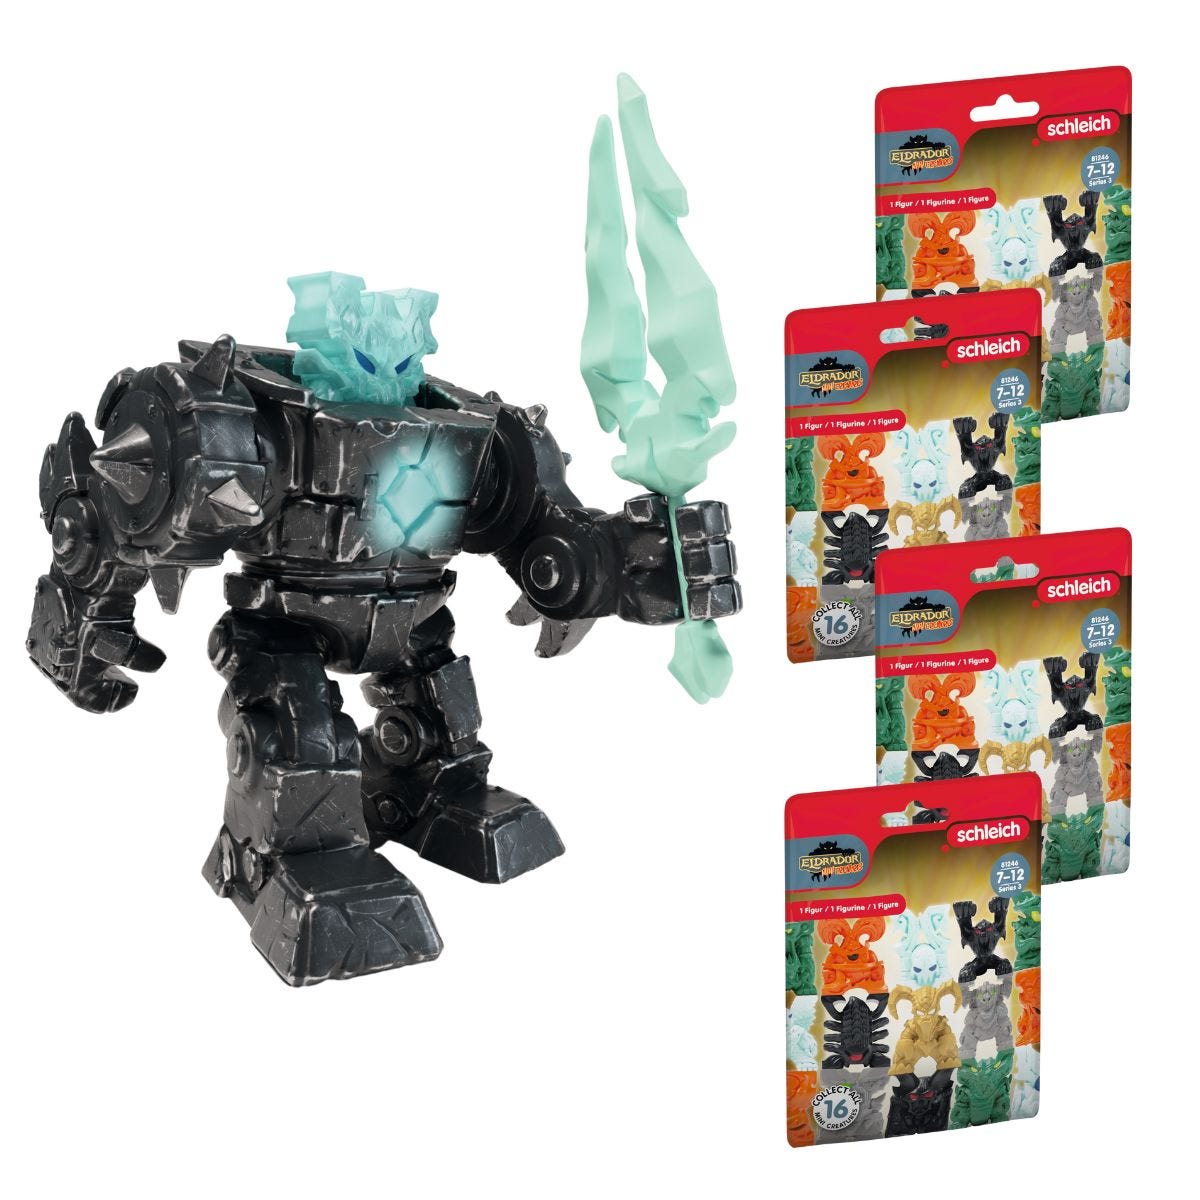 Shadow Ice Robot + 4 Mini Creature Blind Bags